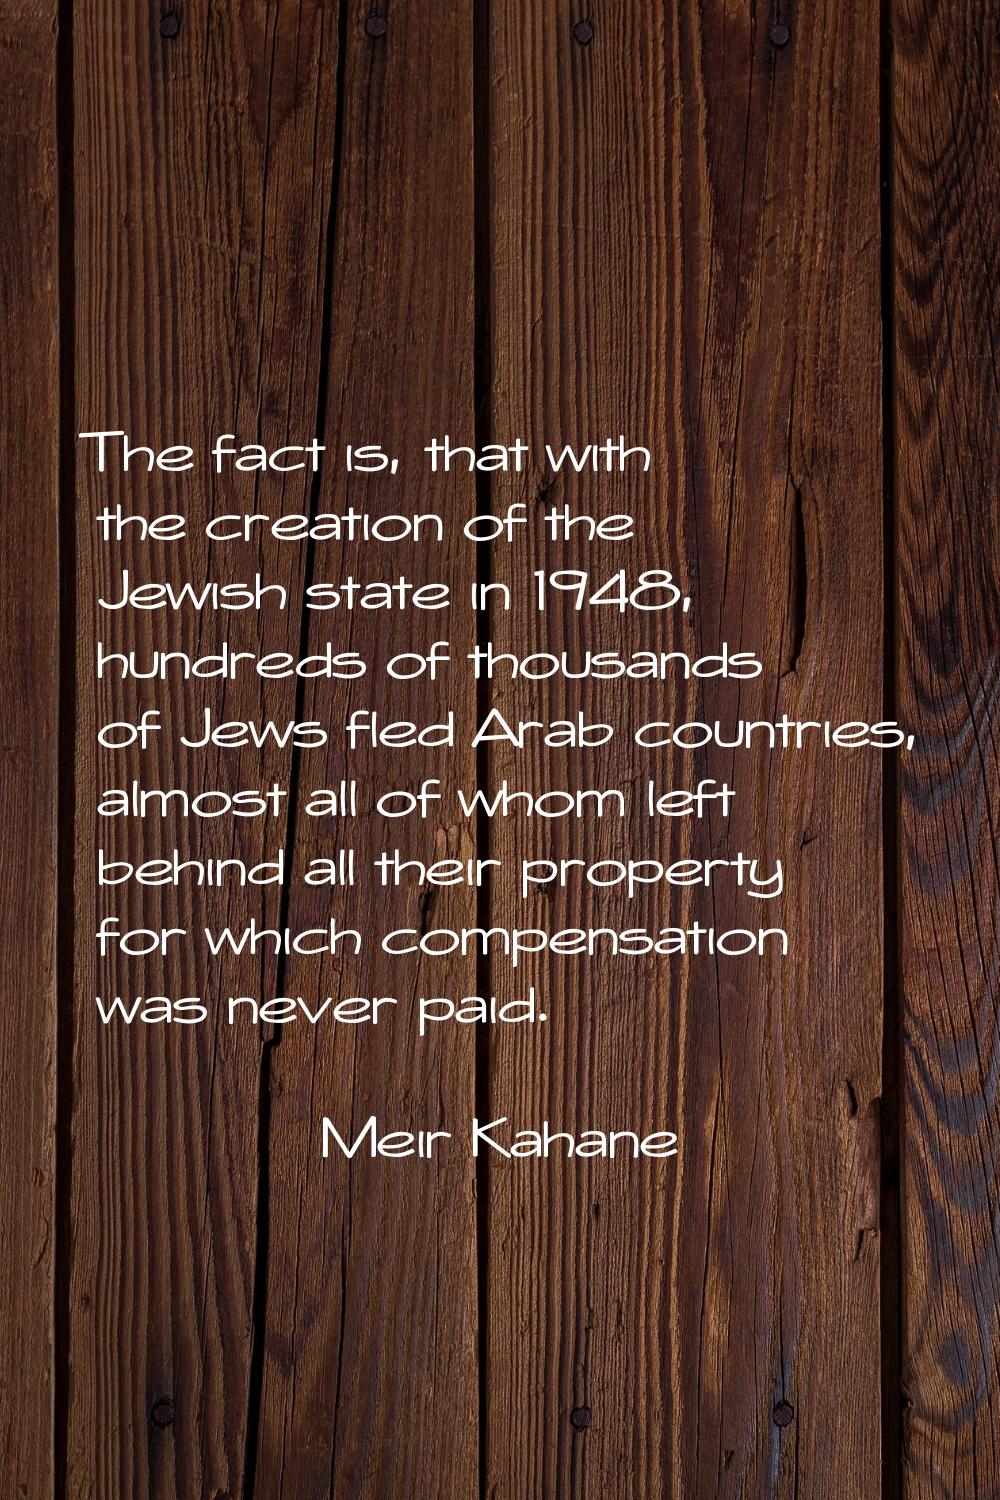 The fact is, that with the creation of the Jewish state in 1948, hundreds of thousands of Jews fled